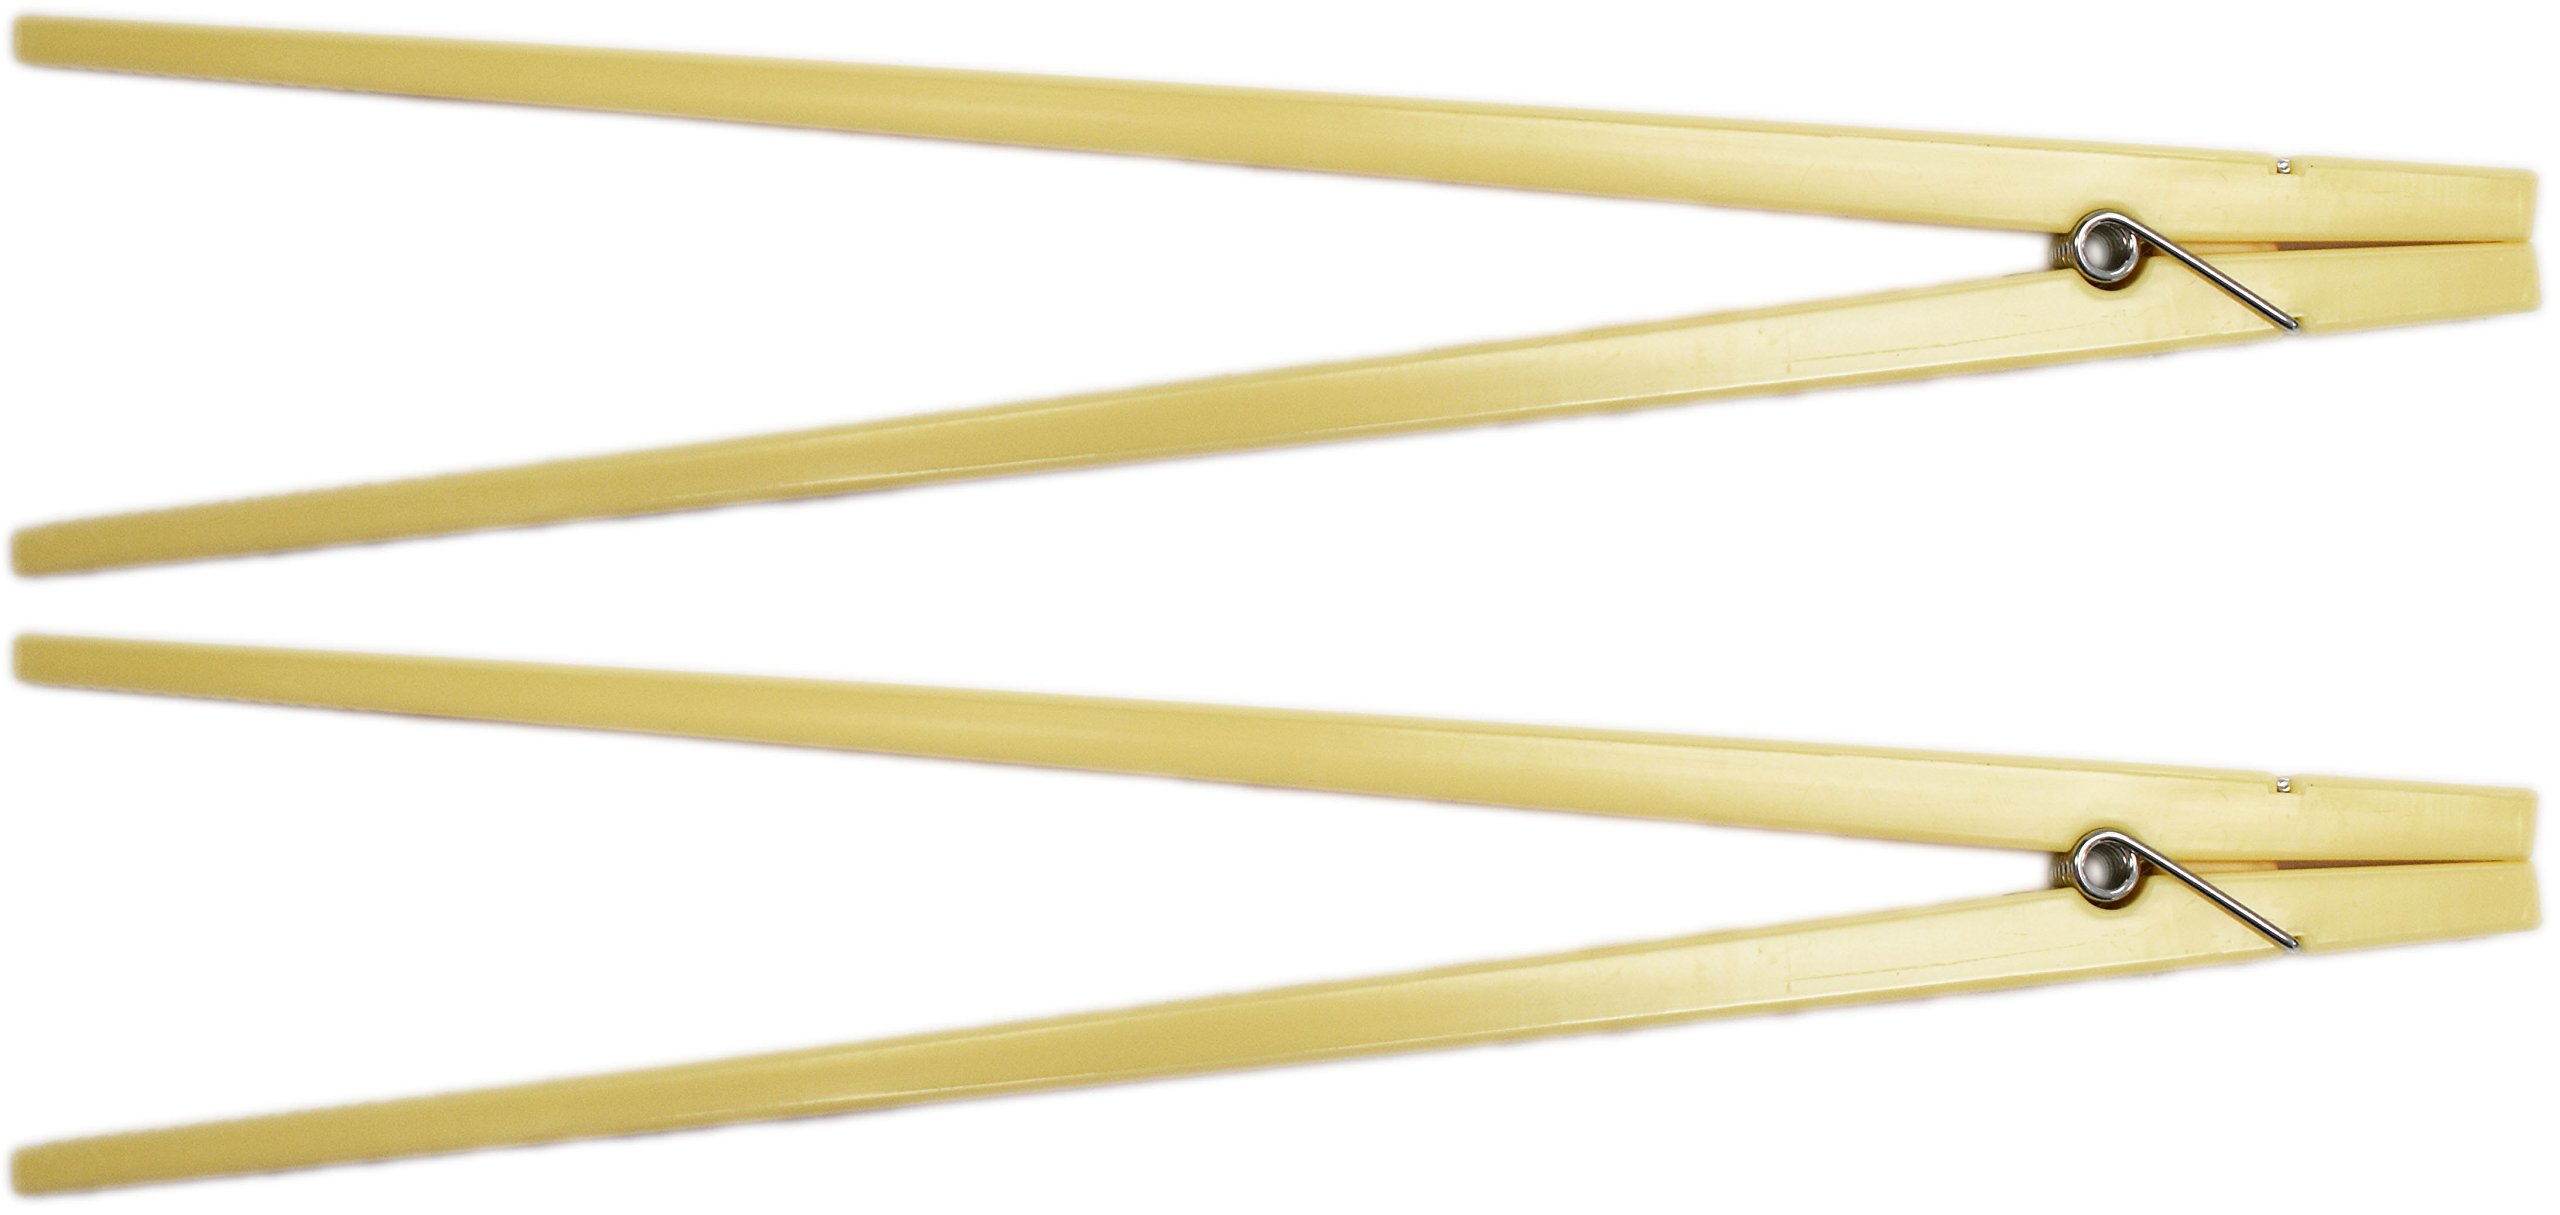 Set of 2 Clothespin Chopsticks! - Measures Approx. 9" Inches Long - Reusable Training Chopsticks - Beginners Chopsticks Perfect for any Age and Occasion! (2)